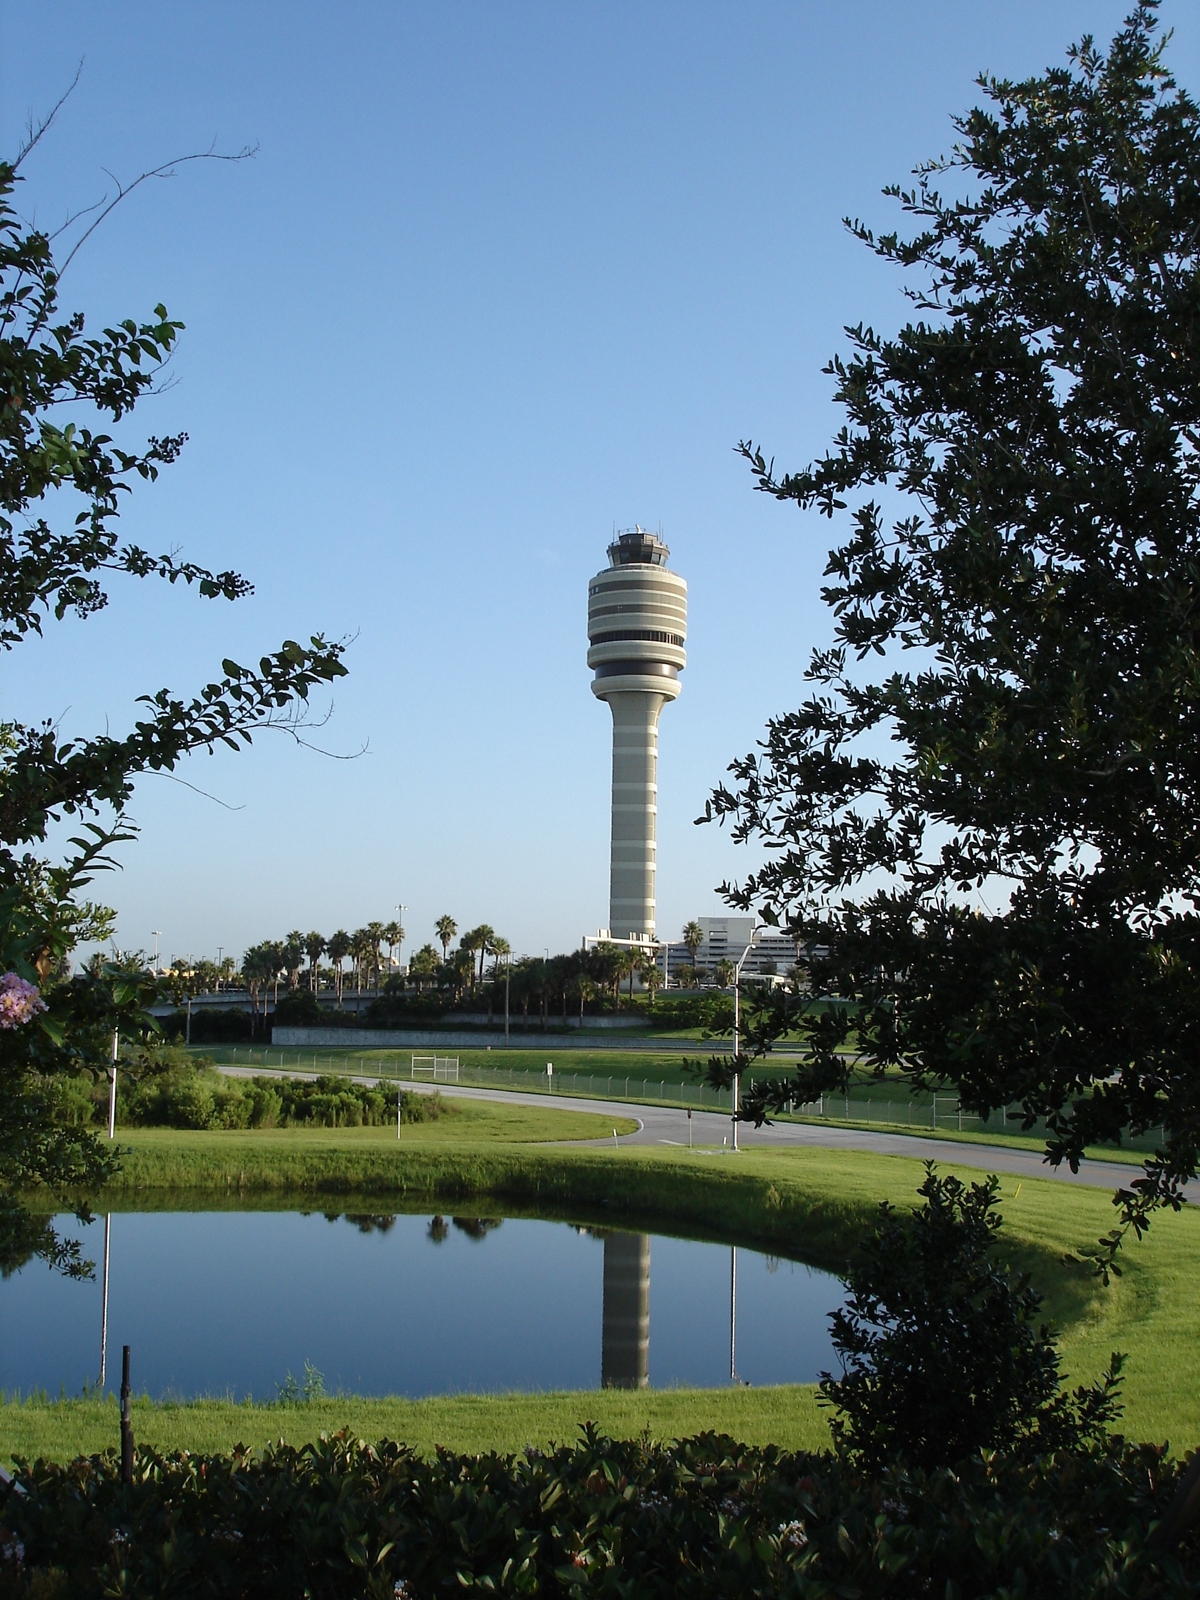 FAA Tower Reflected